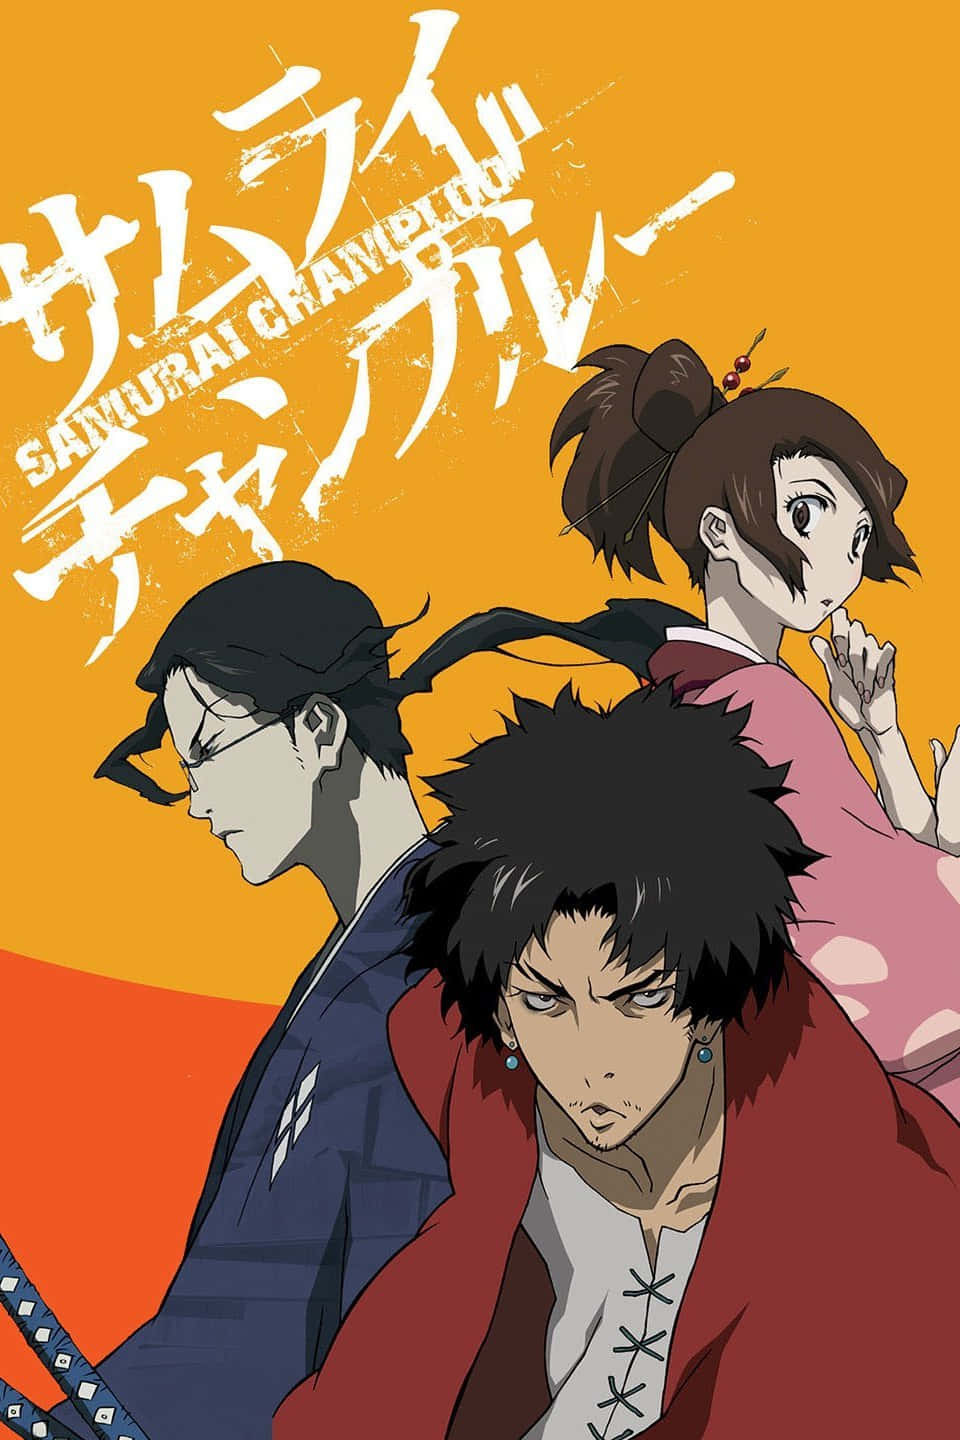 Mugen and Jin—the two main characters of Samurai Champloo